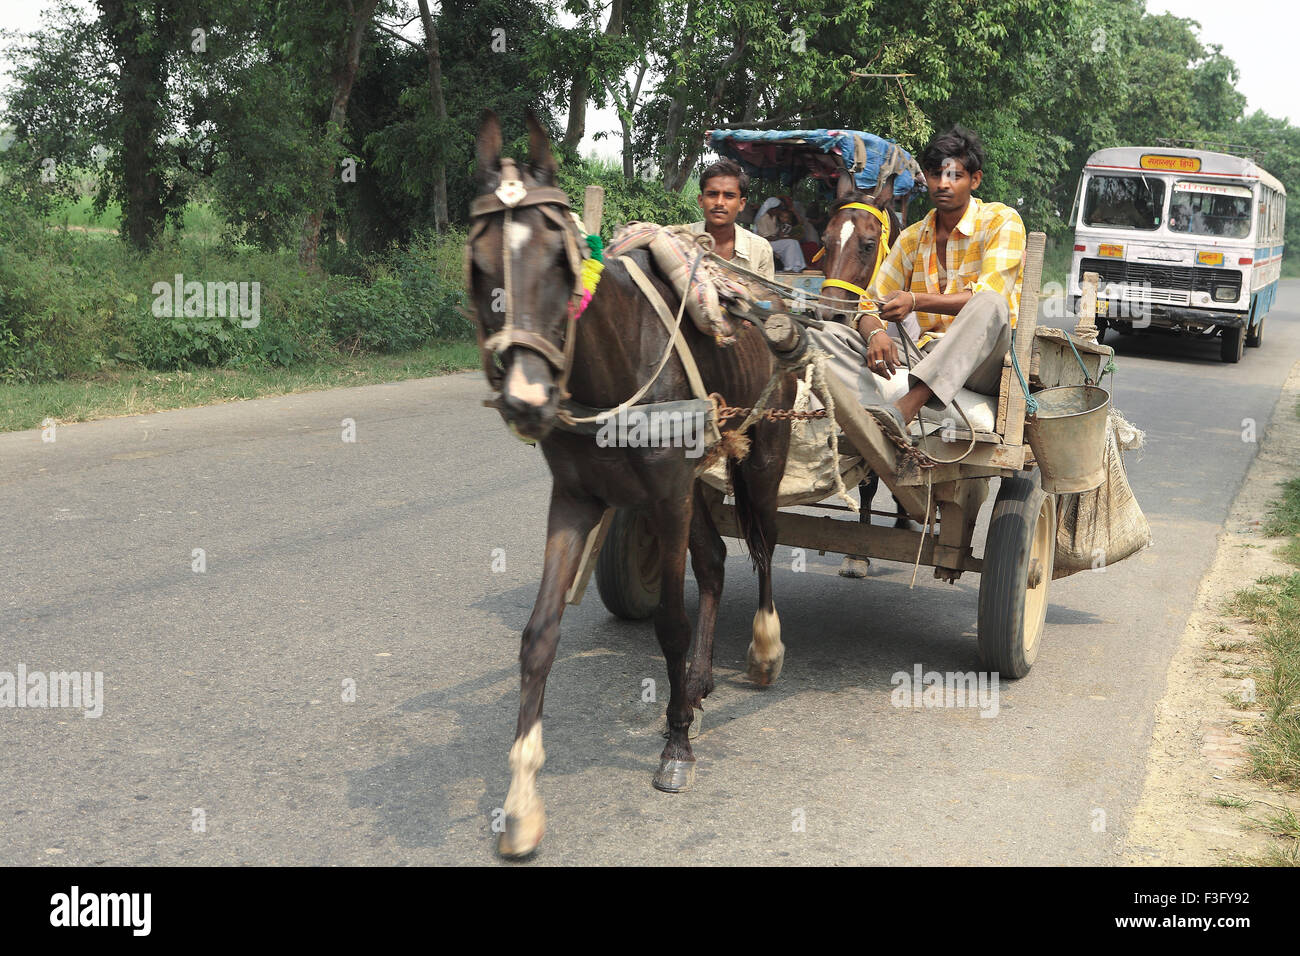 Horse cart with S.T. bus in background on highway at village Nanota ; District Sarahanpur ; Uttar Pradesh ; India Stock Photo